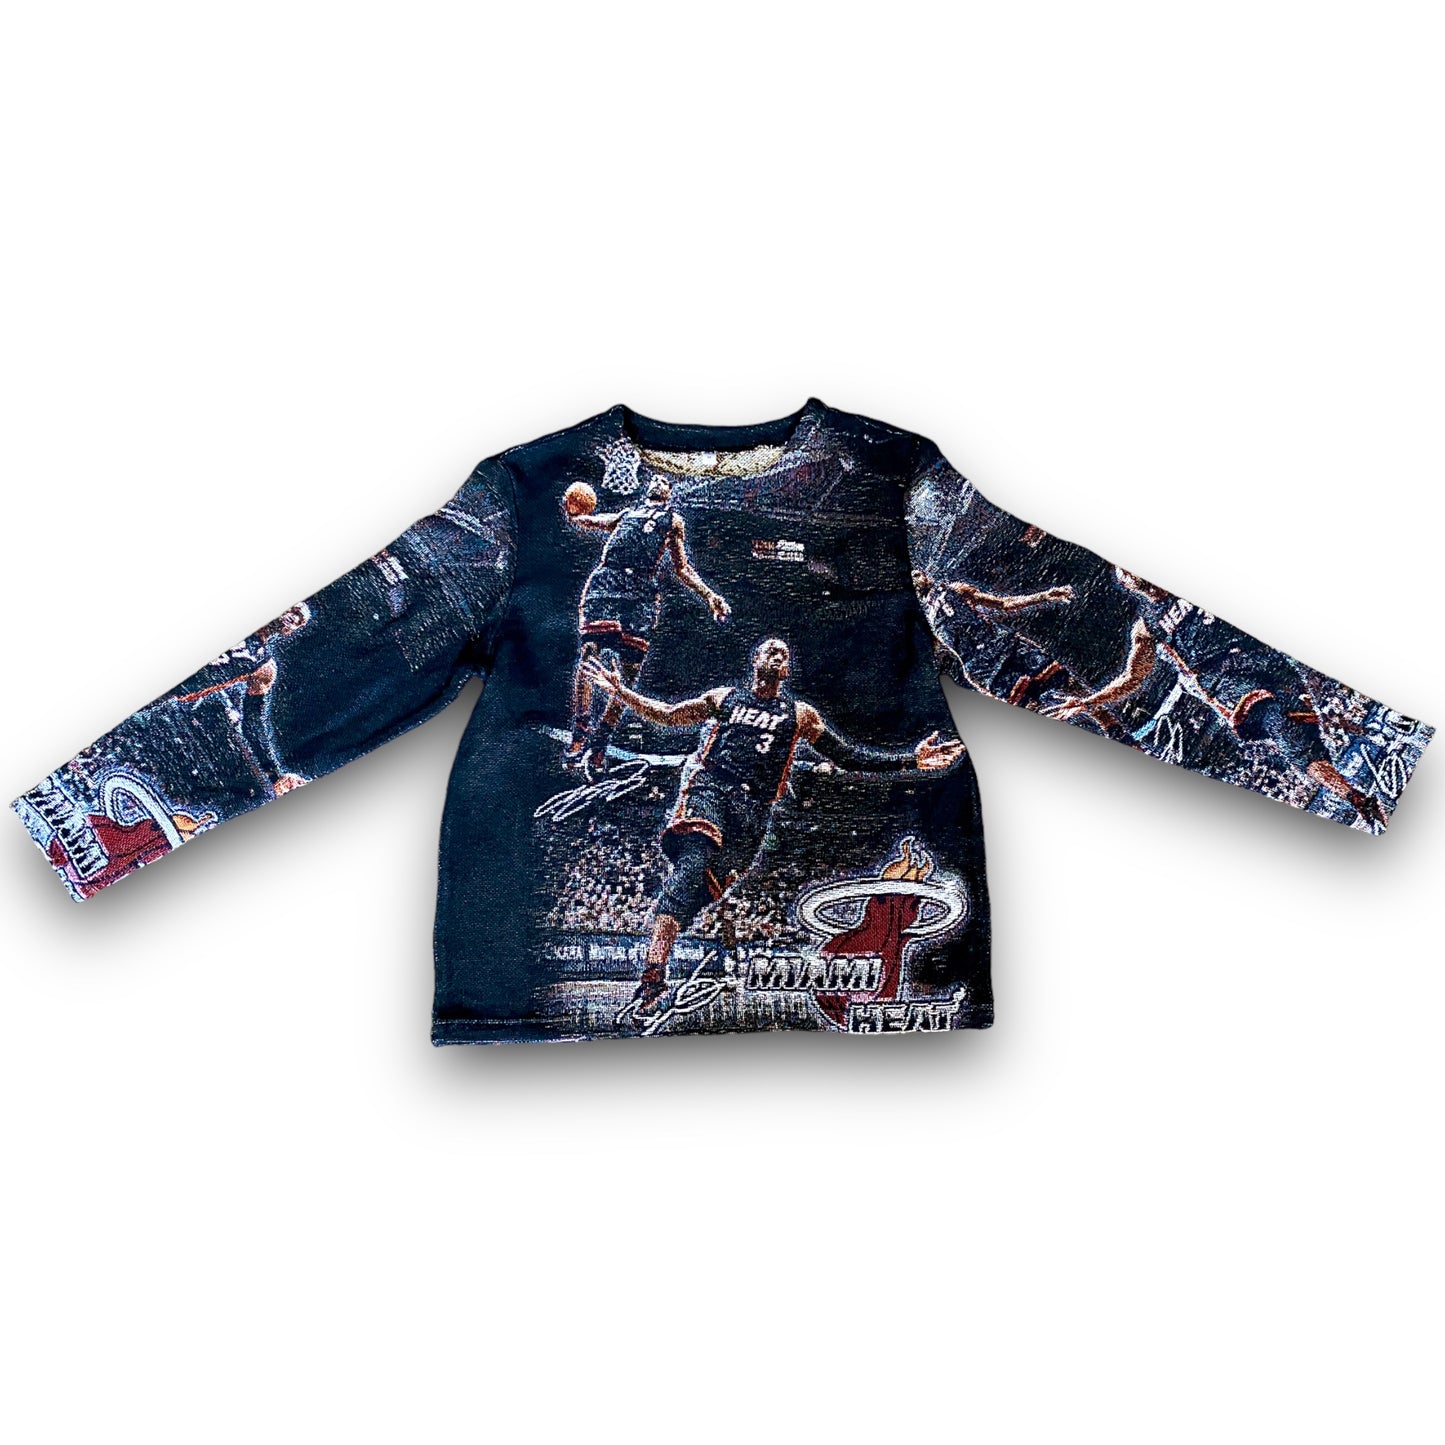 Lebron/Wade Tribute Dunk Knitted Pullover Sweater *LIMITED EDITION*